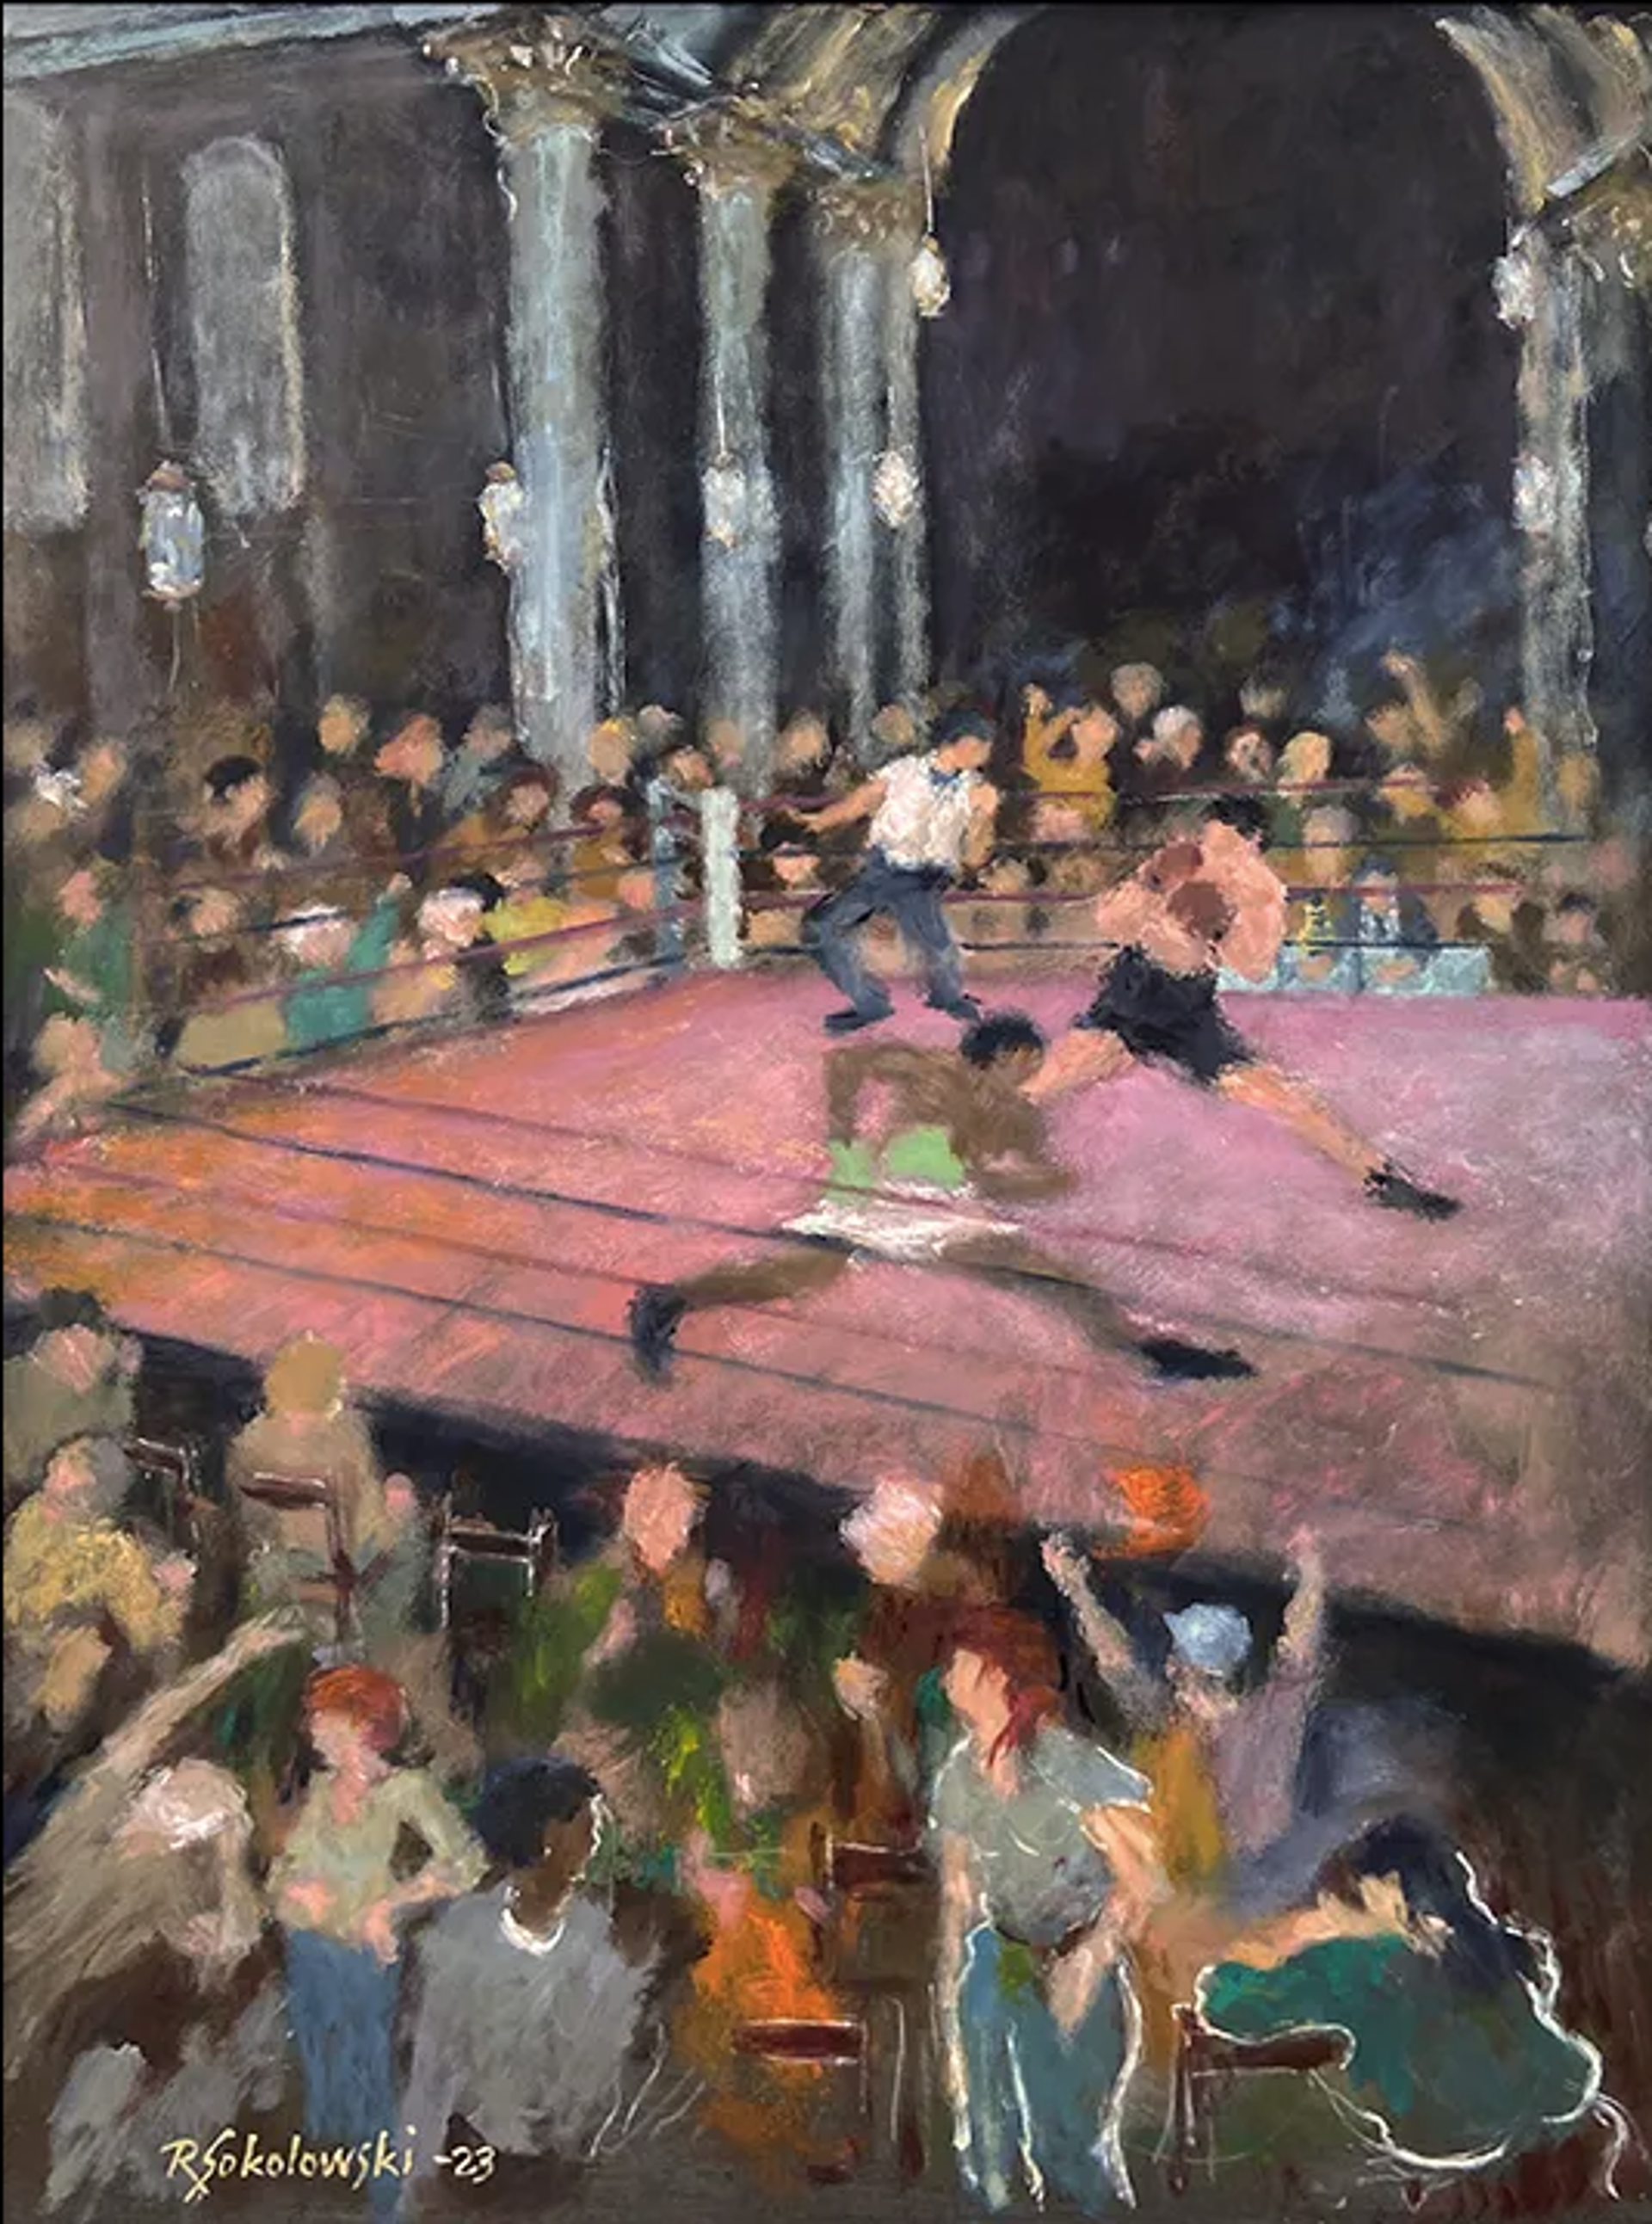 The Boxing Match at the Priory by Ray Sokolowski